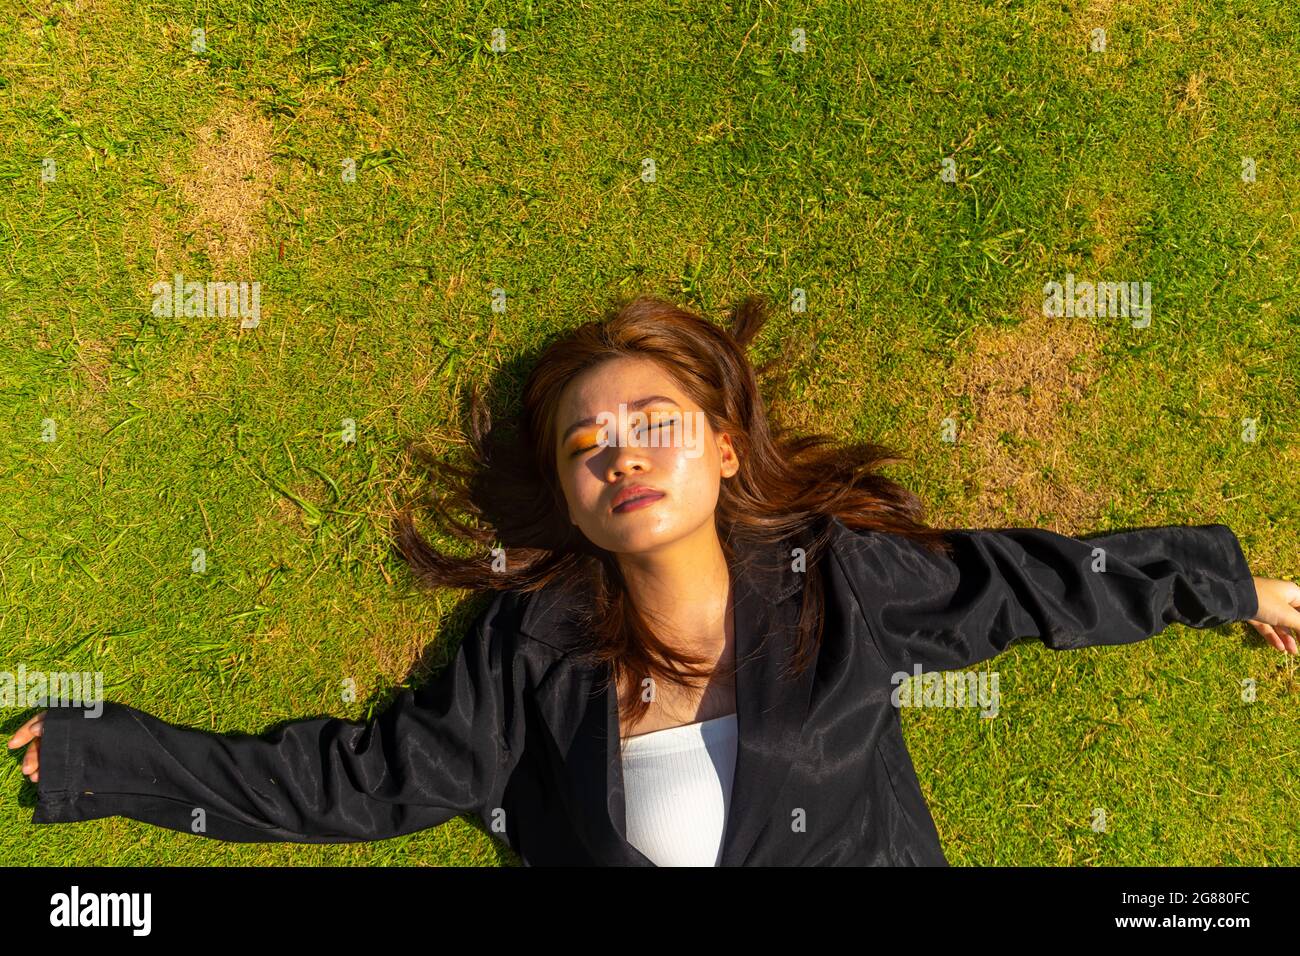 An attractive South Asian female wearing a black formal coat while lying on the ground Stock Photo